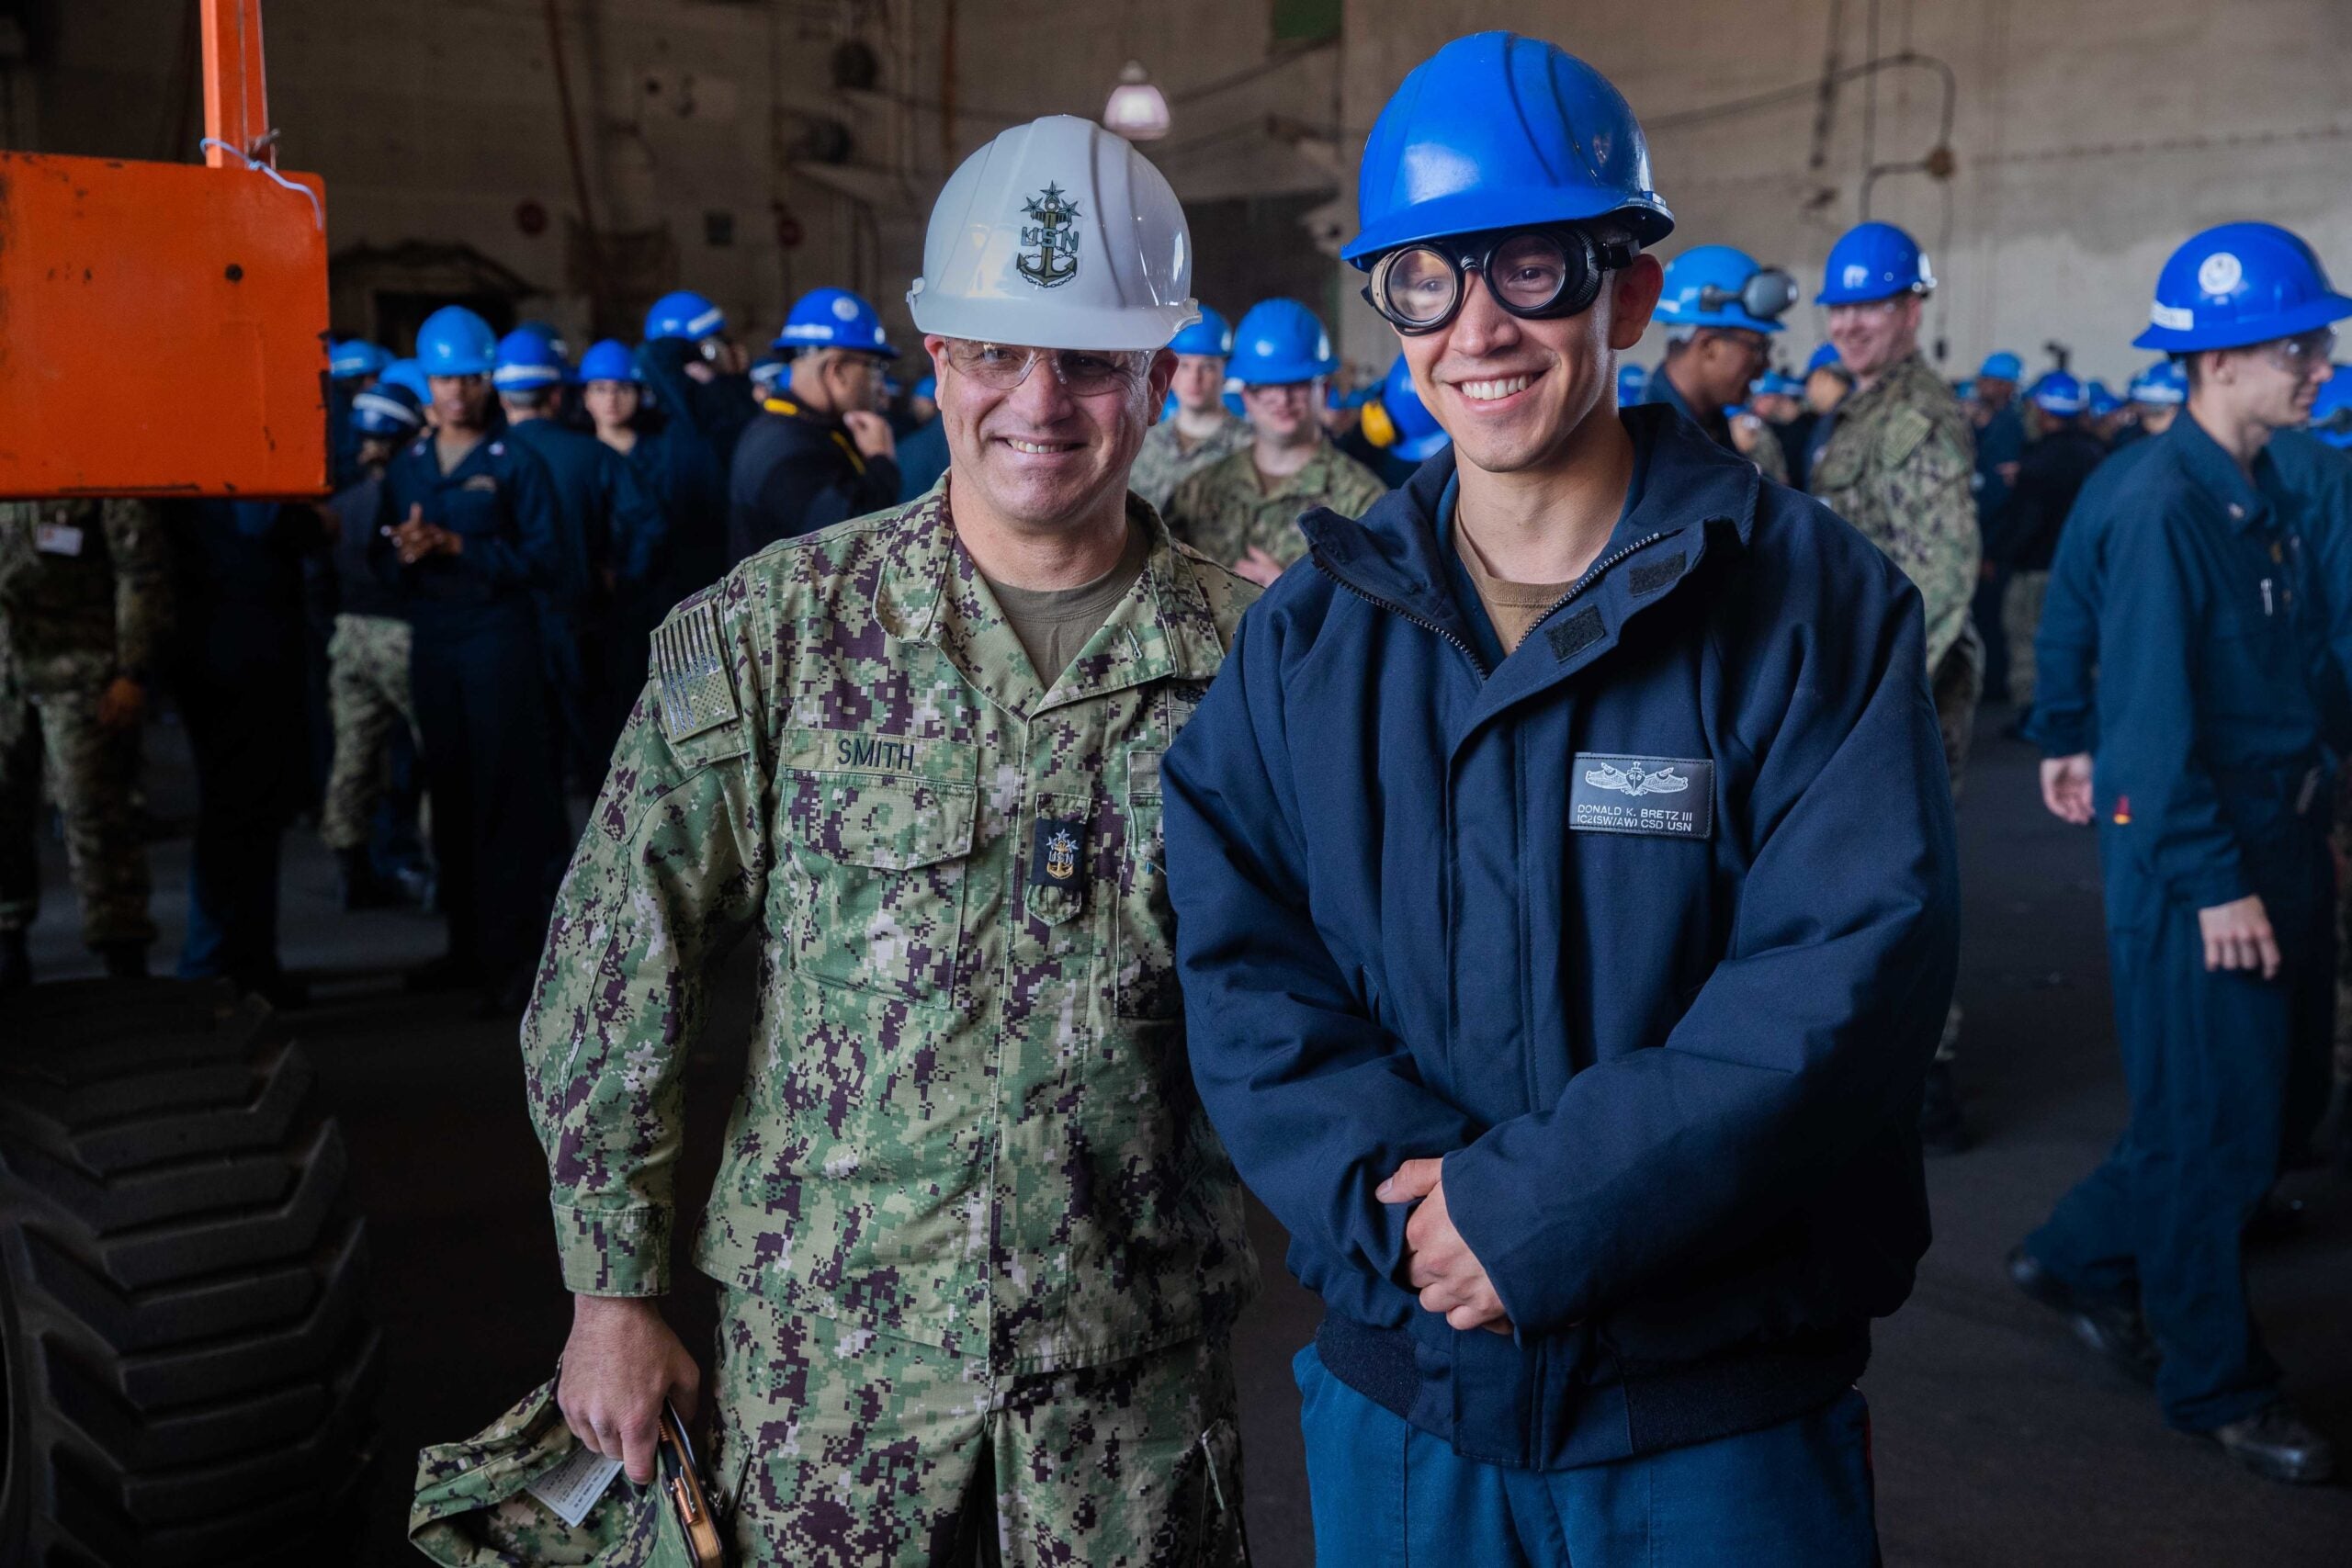 220422-N-CM740-1209

NEWPORT NEWS, Va. (April 22, 2022) – Master Chief Petty Officer of the Navy Russell L. Smith, left, poses for a photo with Interior Communication Electrician 2nd Class (SW/AW) Donald K. Bretz, assigned to combat systems department aboard the Nimitz-class aircraft carrier USS George Washington (CVN 73), after addressing the crew in an all-hands call in the ship’s hangar bay April 22. George Washington is currently conducting refueling Complex Overhaul (RCOH) at Newport News Shipyard. RCOH is a multi-year project performed only during a carrier’s 50-year service life that includes refueling the ship’s two nuclear reactors, as well as significant repairs, upgrades, and modernization. (U.S. Navy Photo by Mass Communication Specialist 2nd Class Robert J. Stamer)